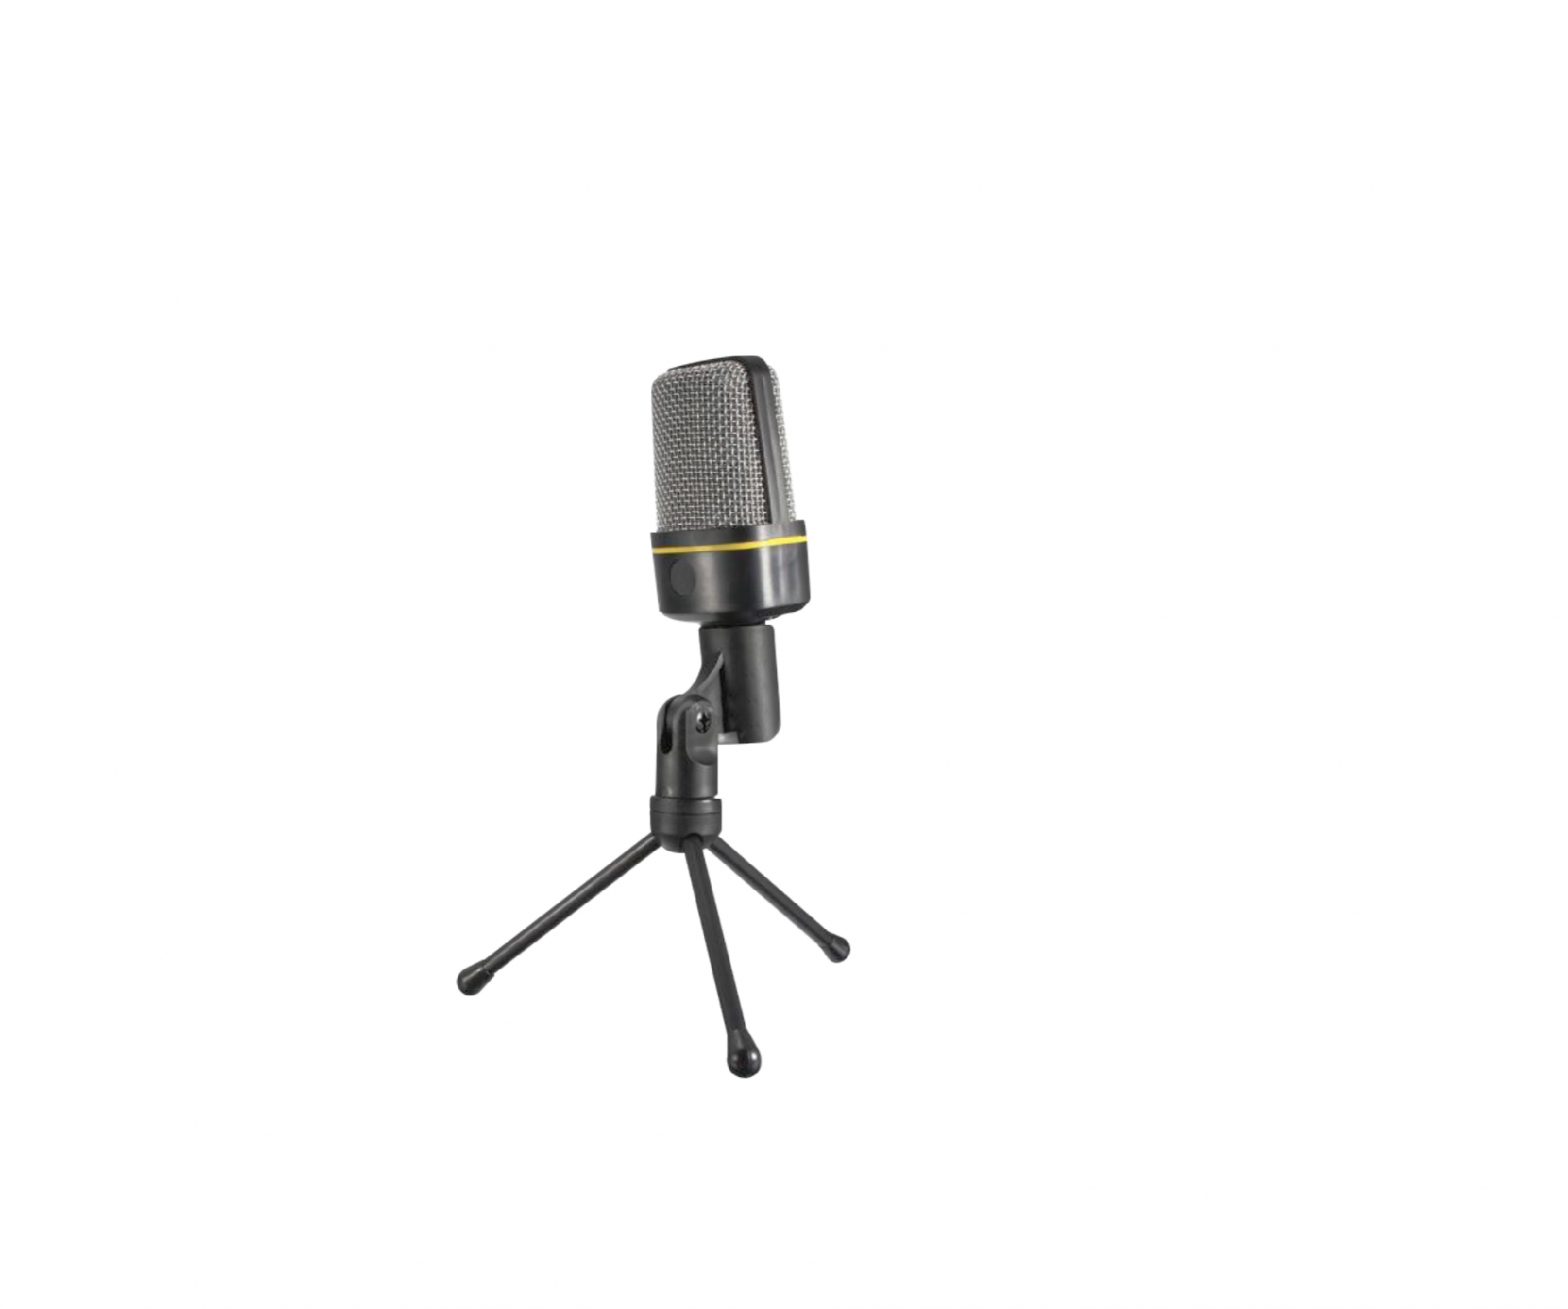 Volkano Handheld Or Desk Microphone With Tripod Instruction Manual